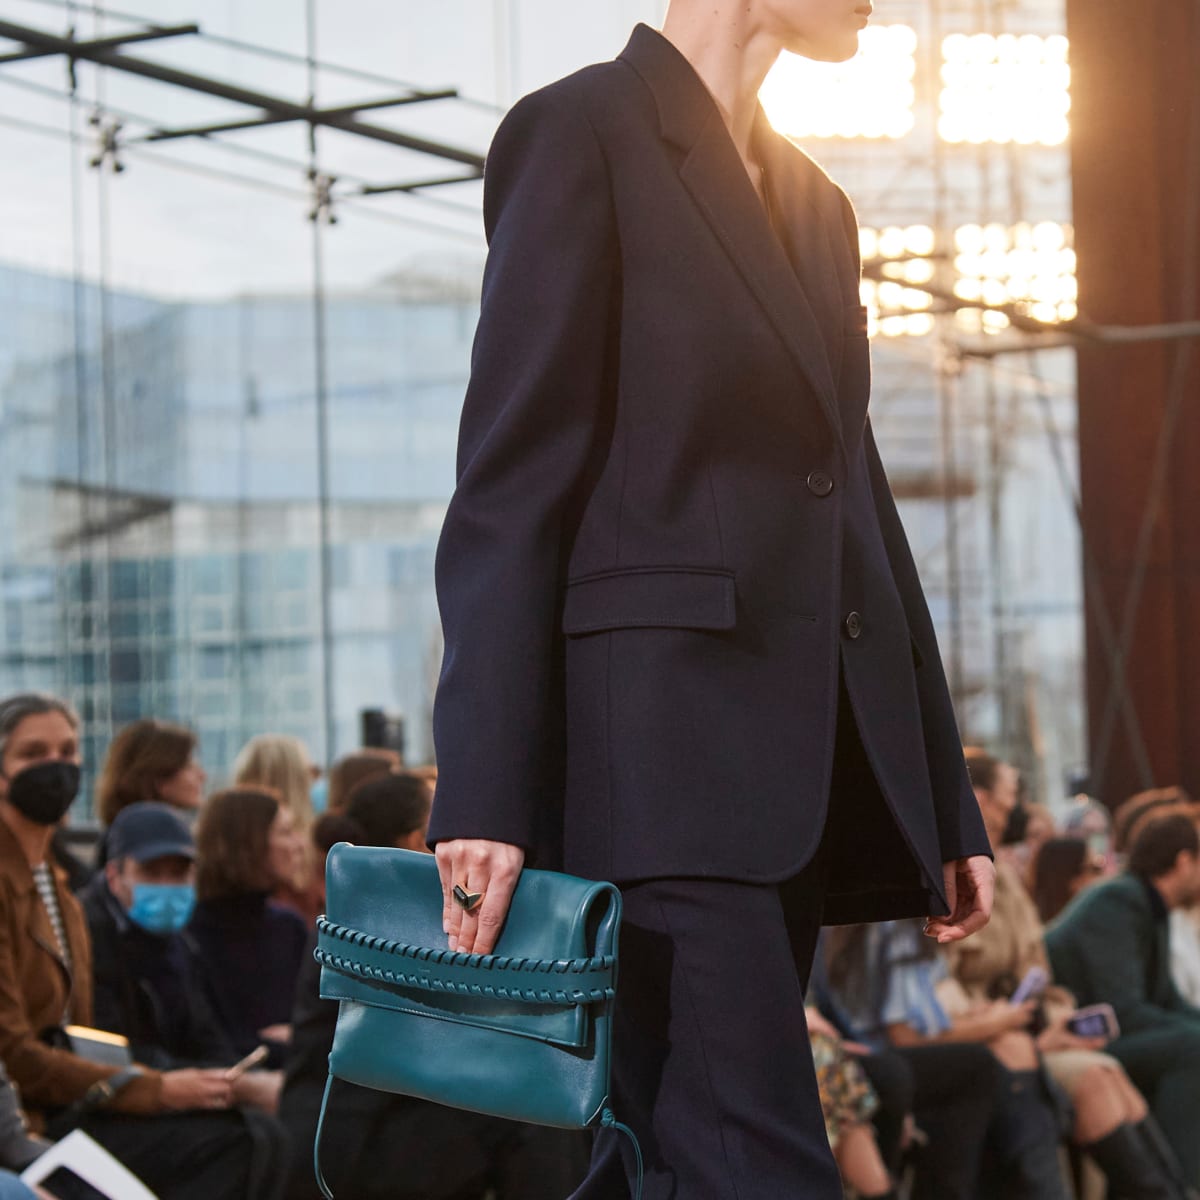 Fashionista's Favorite Fall 2022 Bags From the Paris Runways